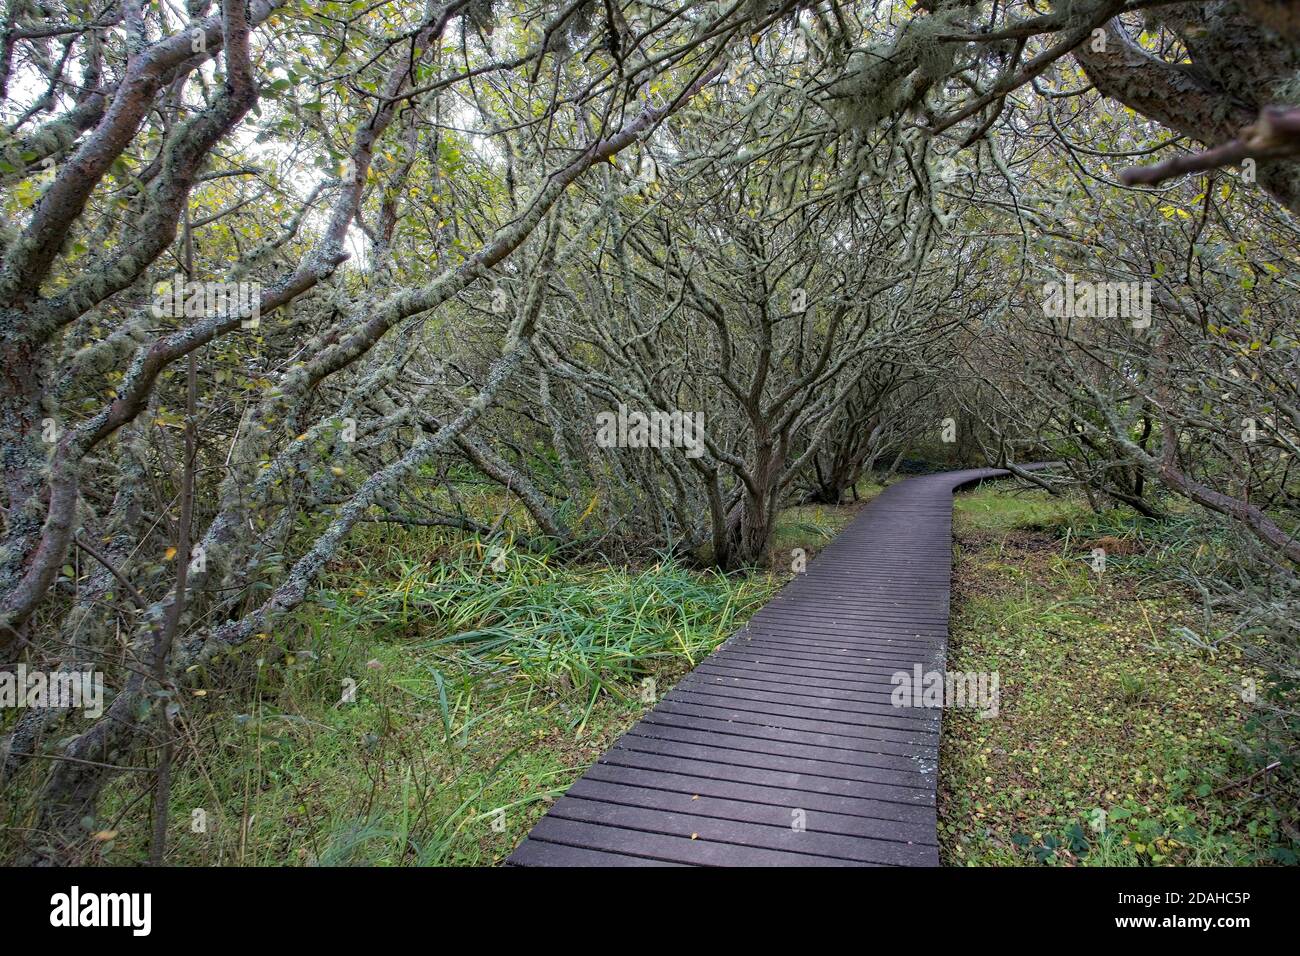 'Enchanted Wood'. Path through woodland, Lower Moors, St Mary's, Isles of Scilly, Cornwall, England, UK. Stock Photo